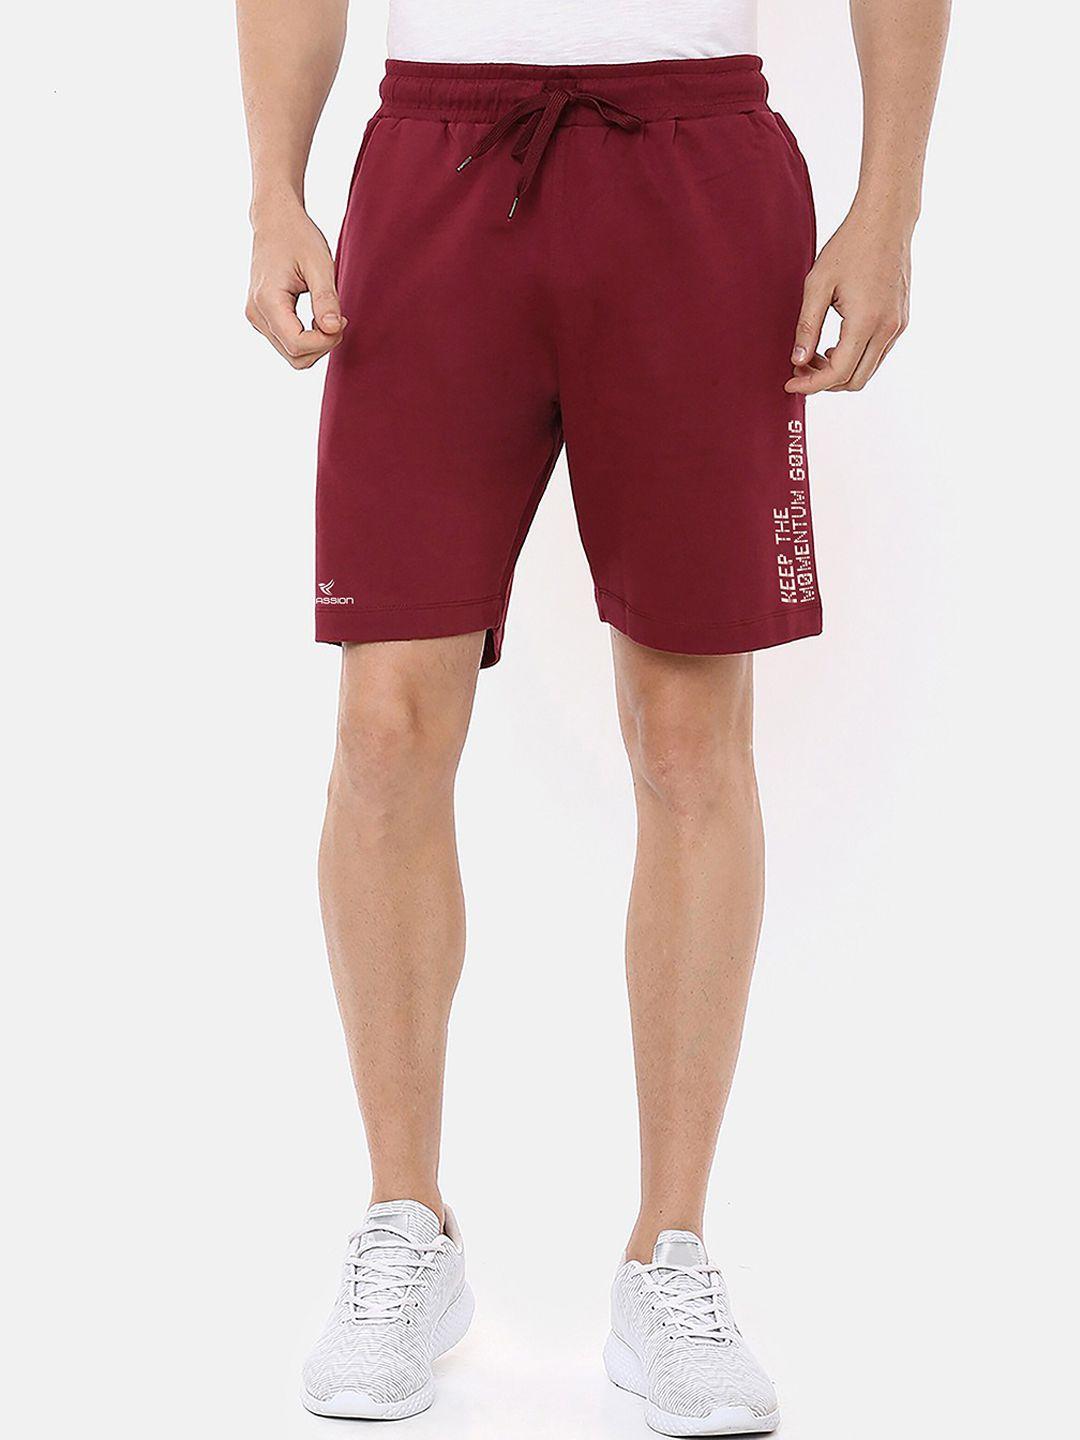 dpassion men maroon typography printed training or gym sports shorts